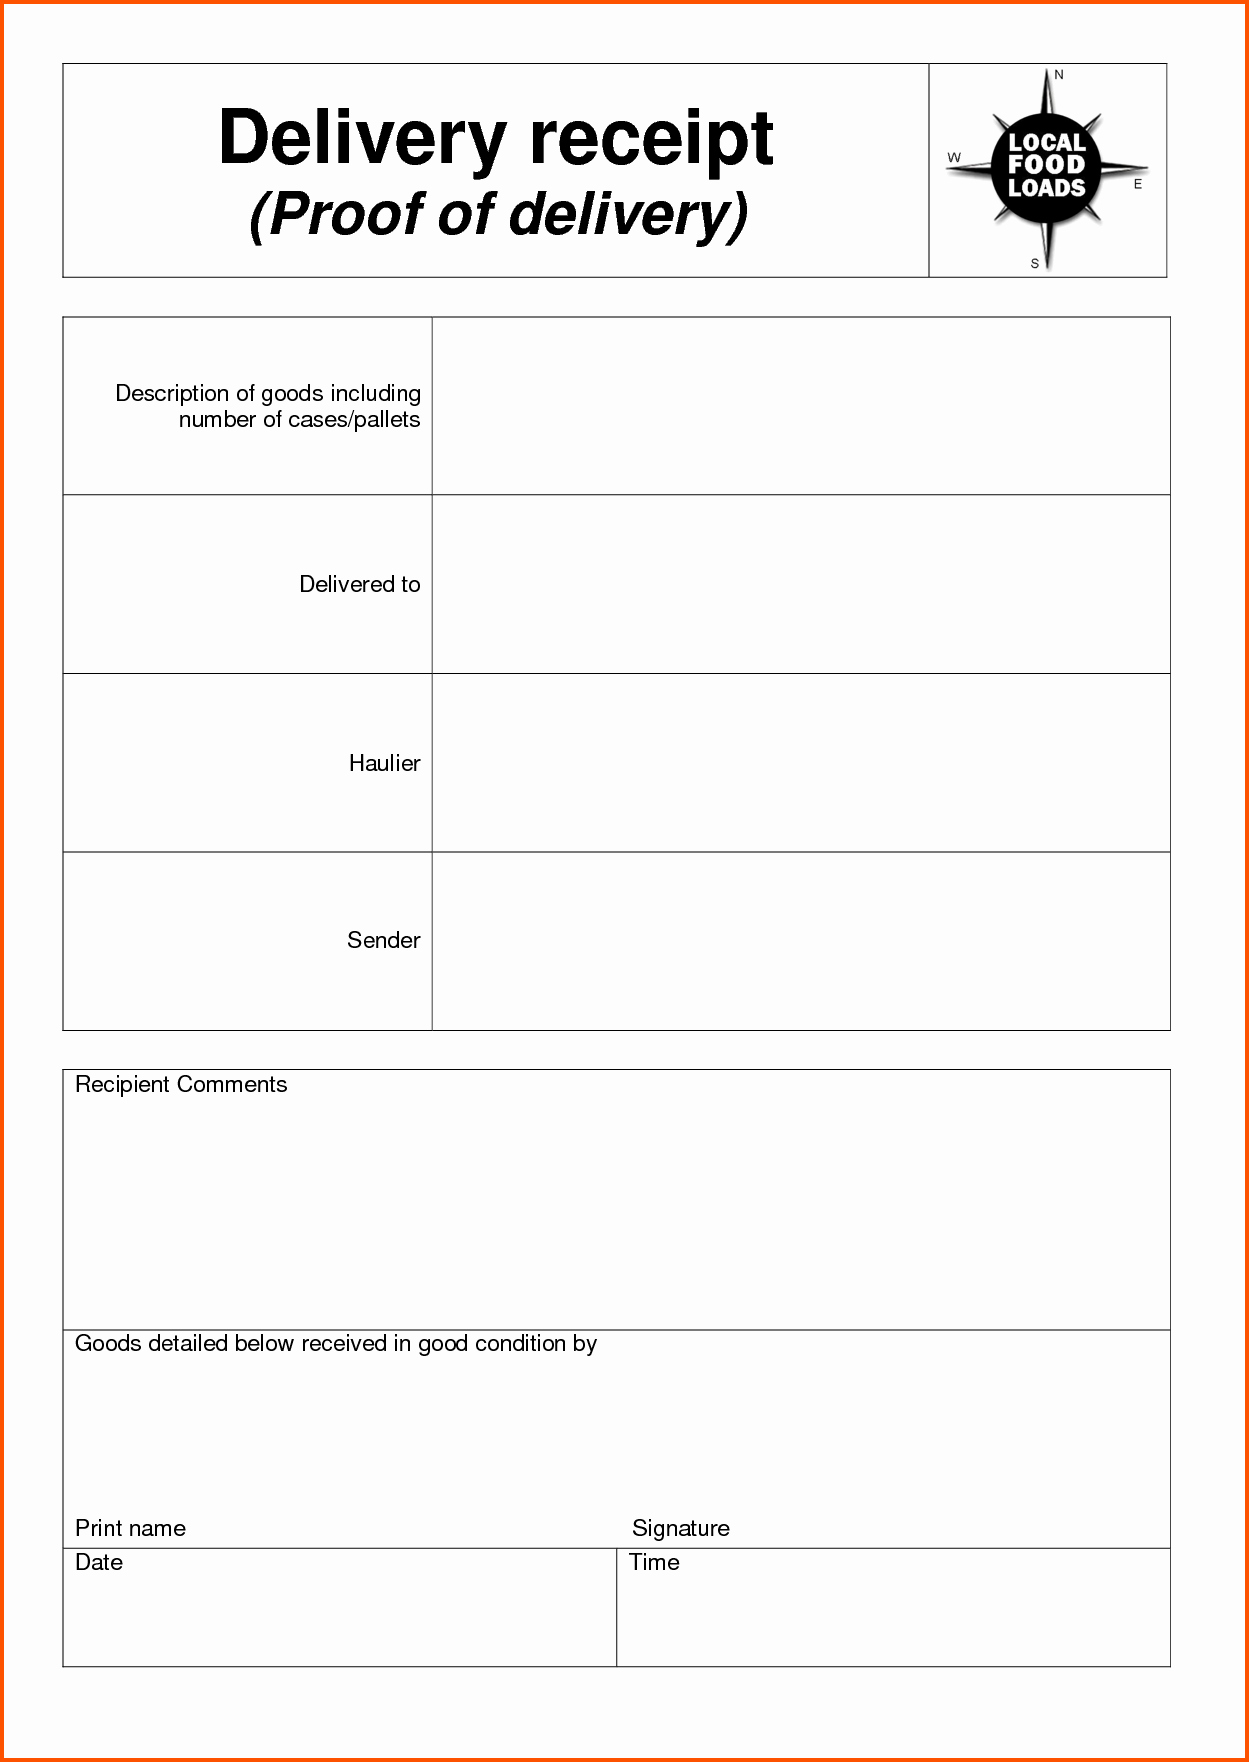 Receipt Of Goods Template Lovely 7 Delivery Receipt Template Ideas Receipt Goods